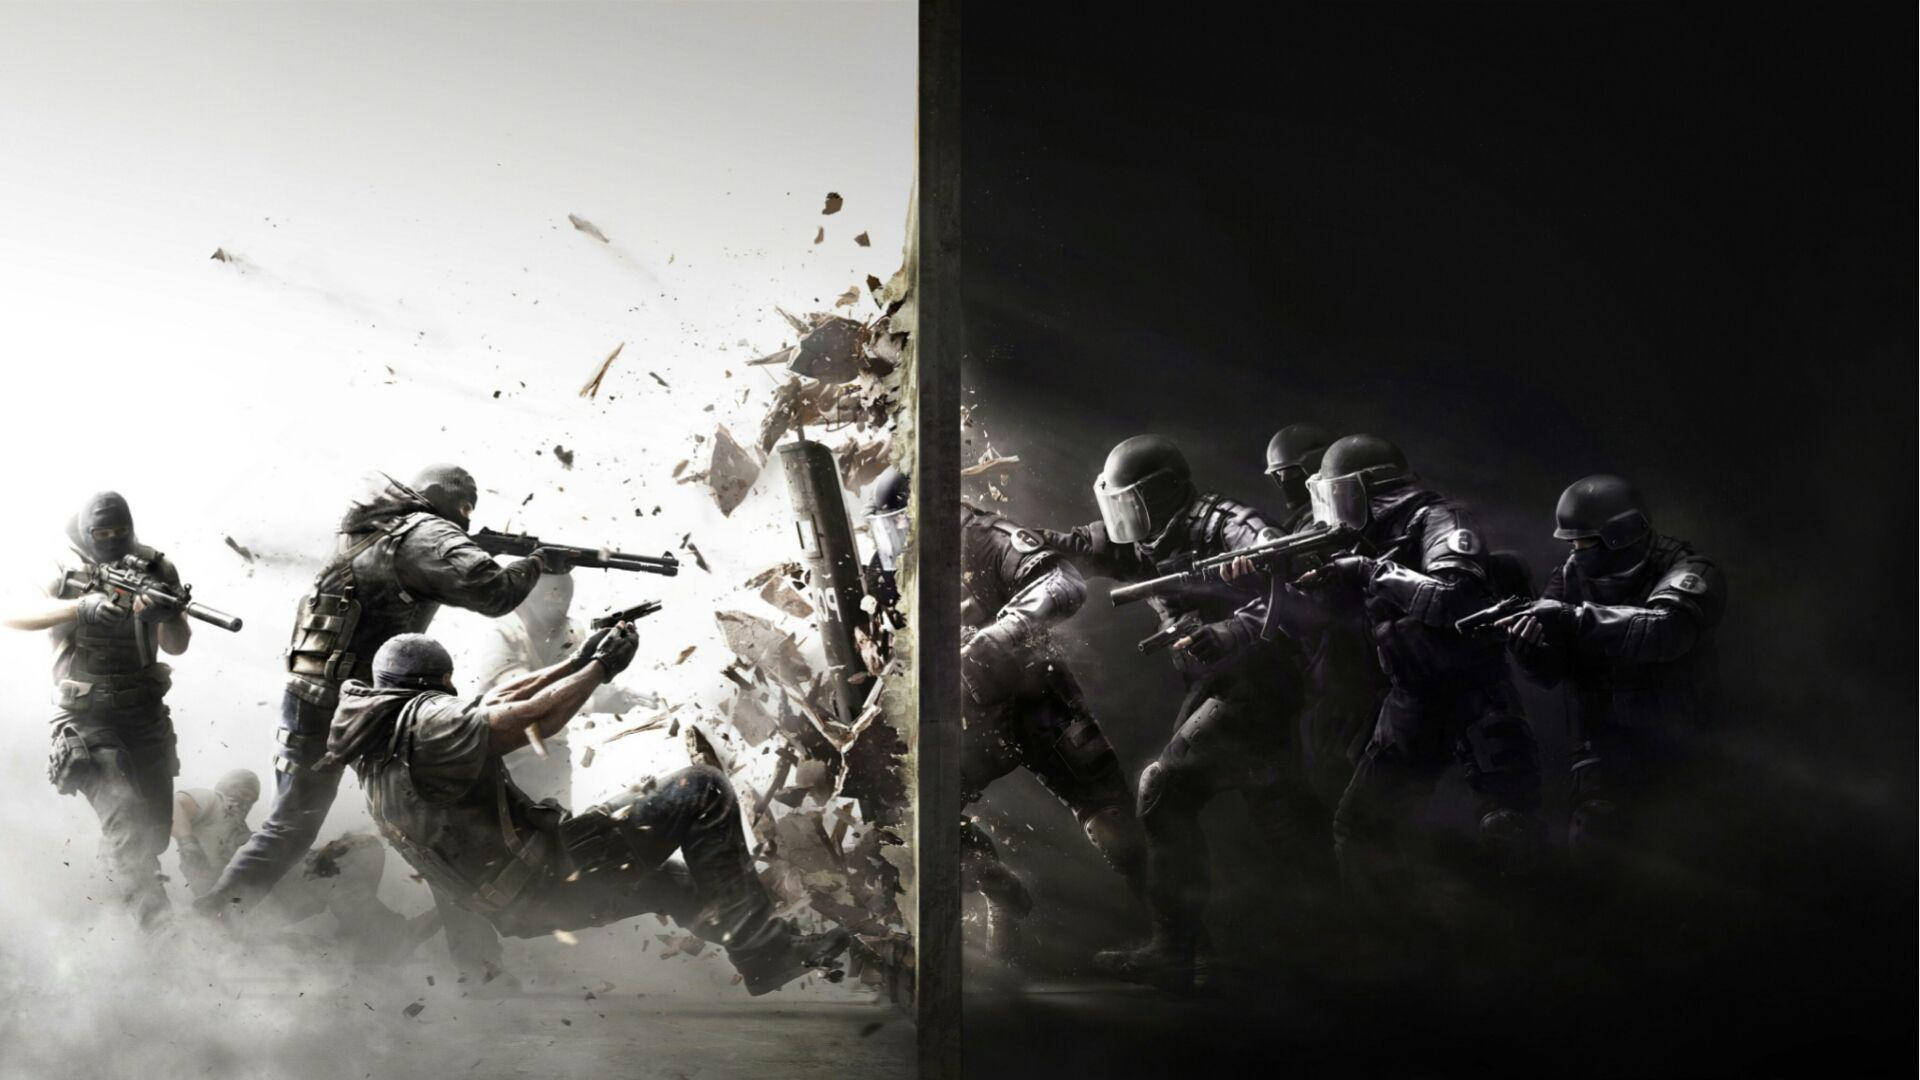 1920X1080 Rainbow Six Siege Wallpaper and Background